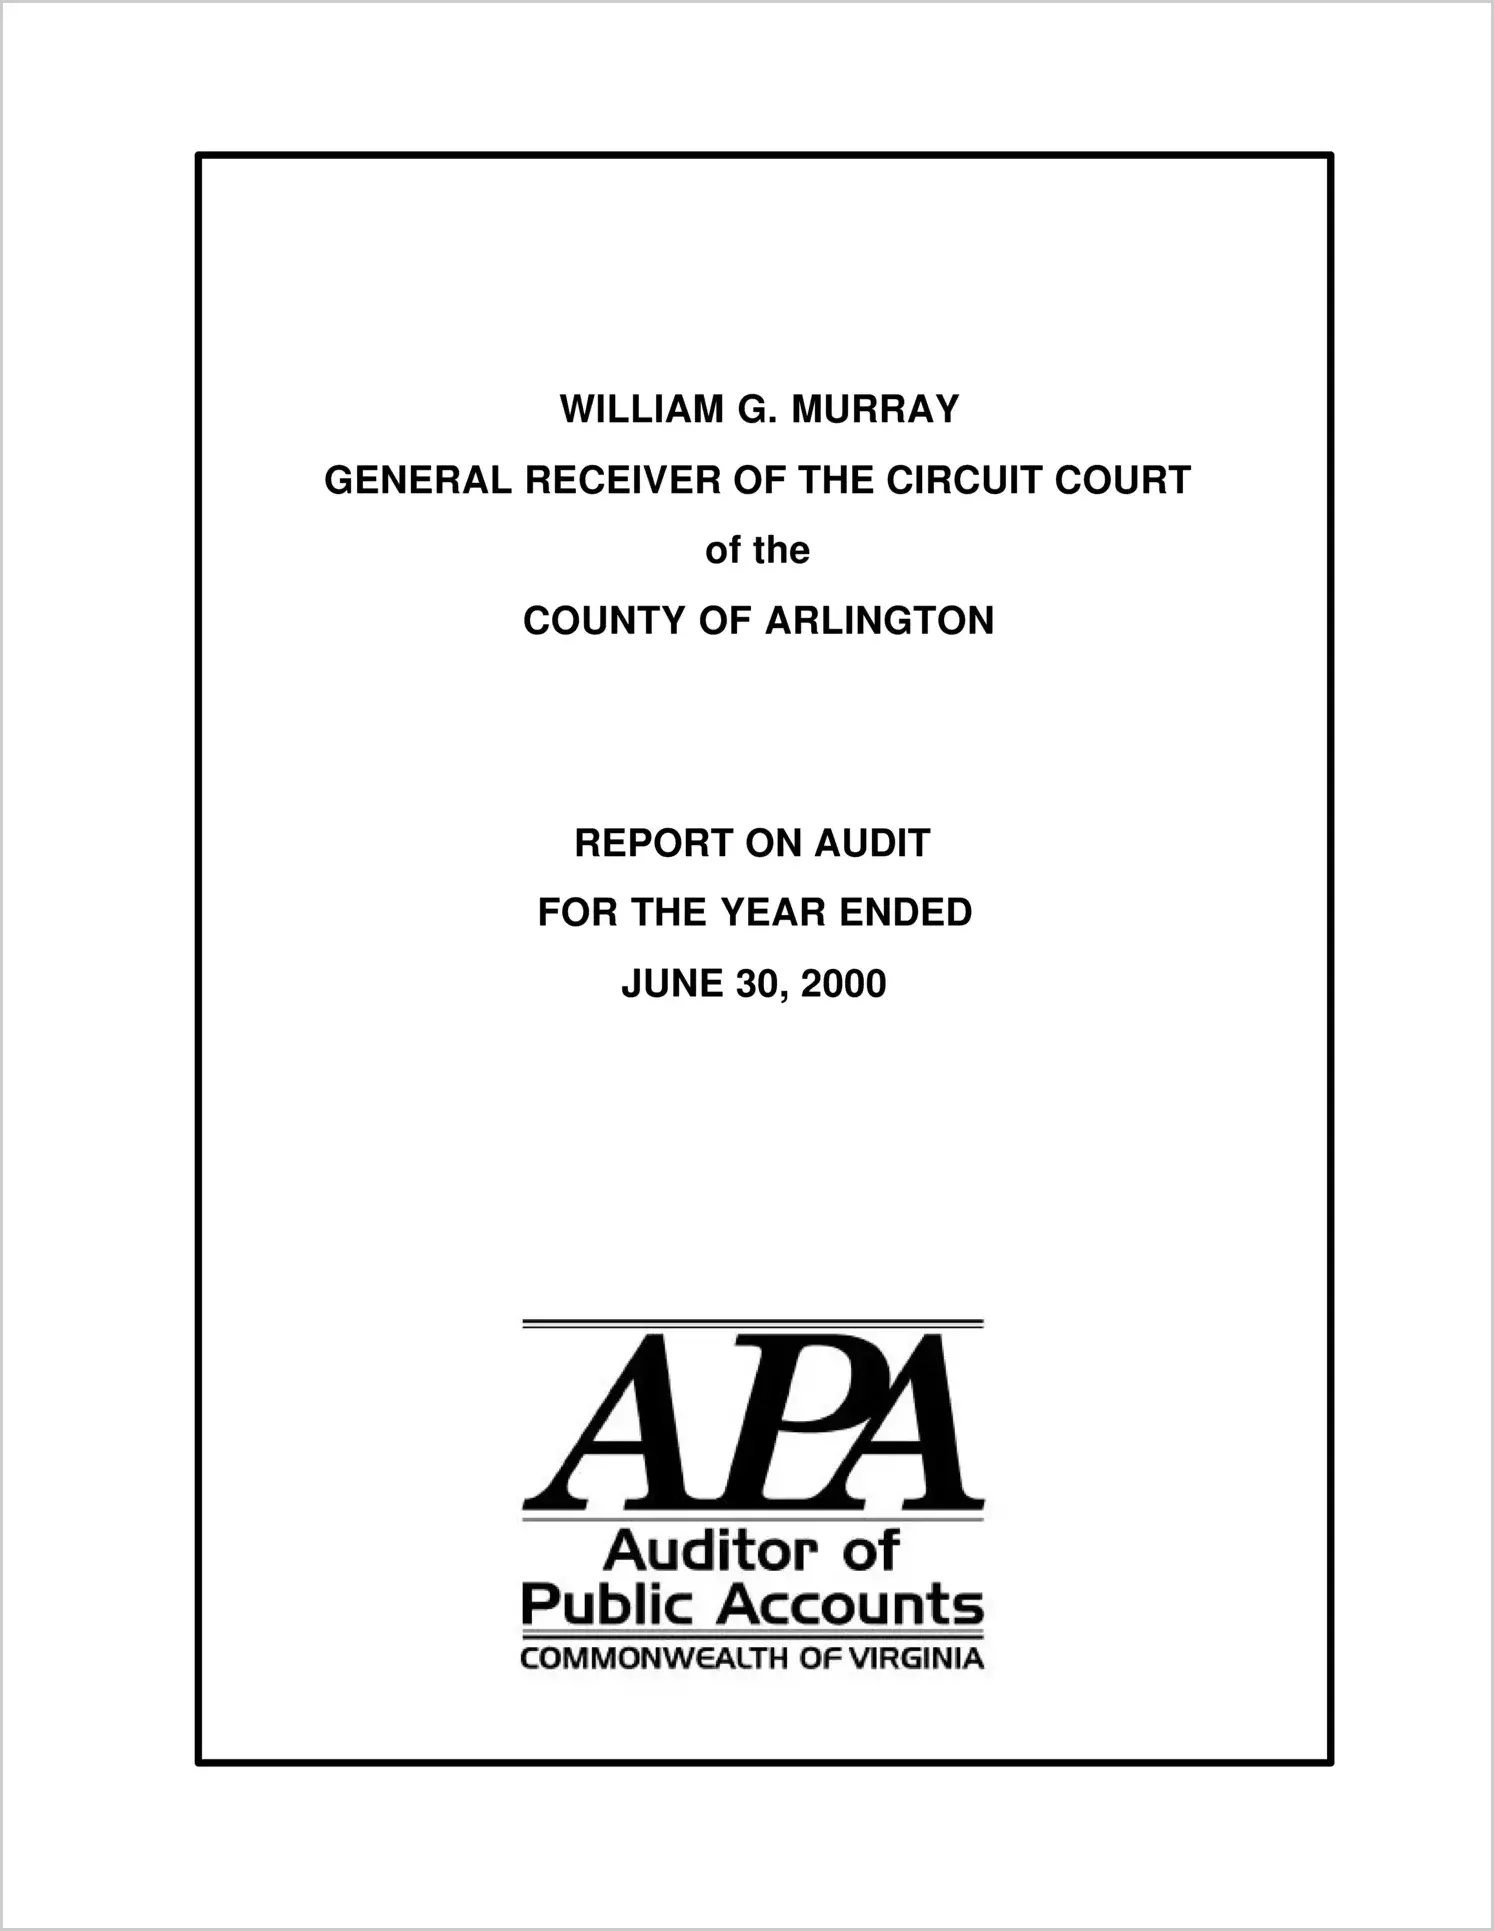 General Receiver of the Circuit Court of the County of Arlington for the period July 1, 2000 through June 30, 2001